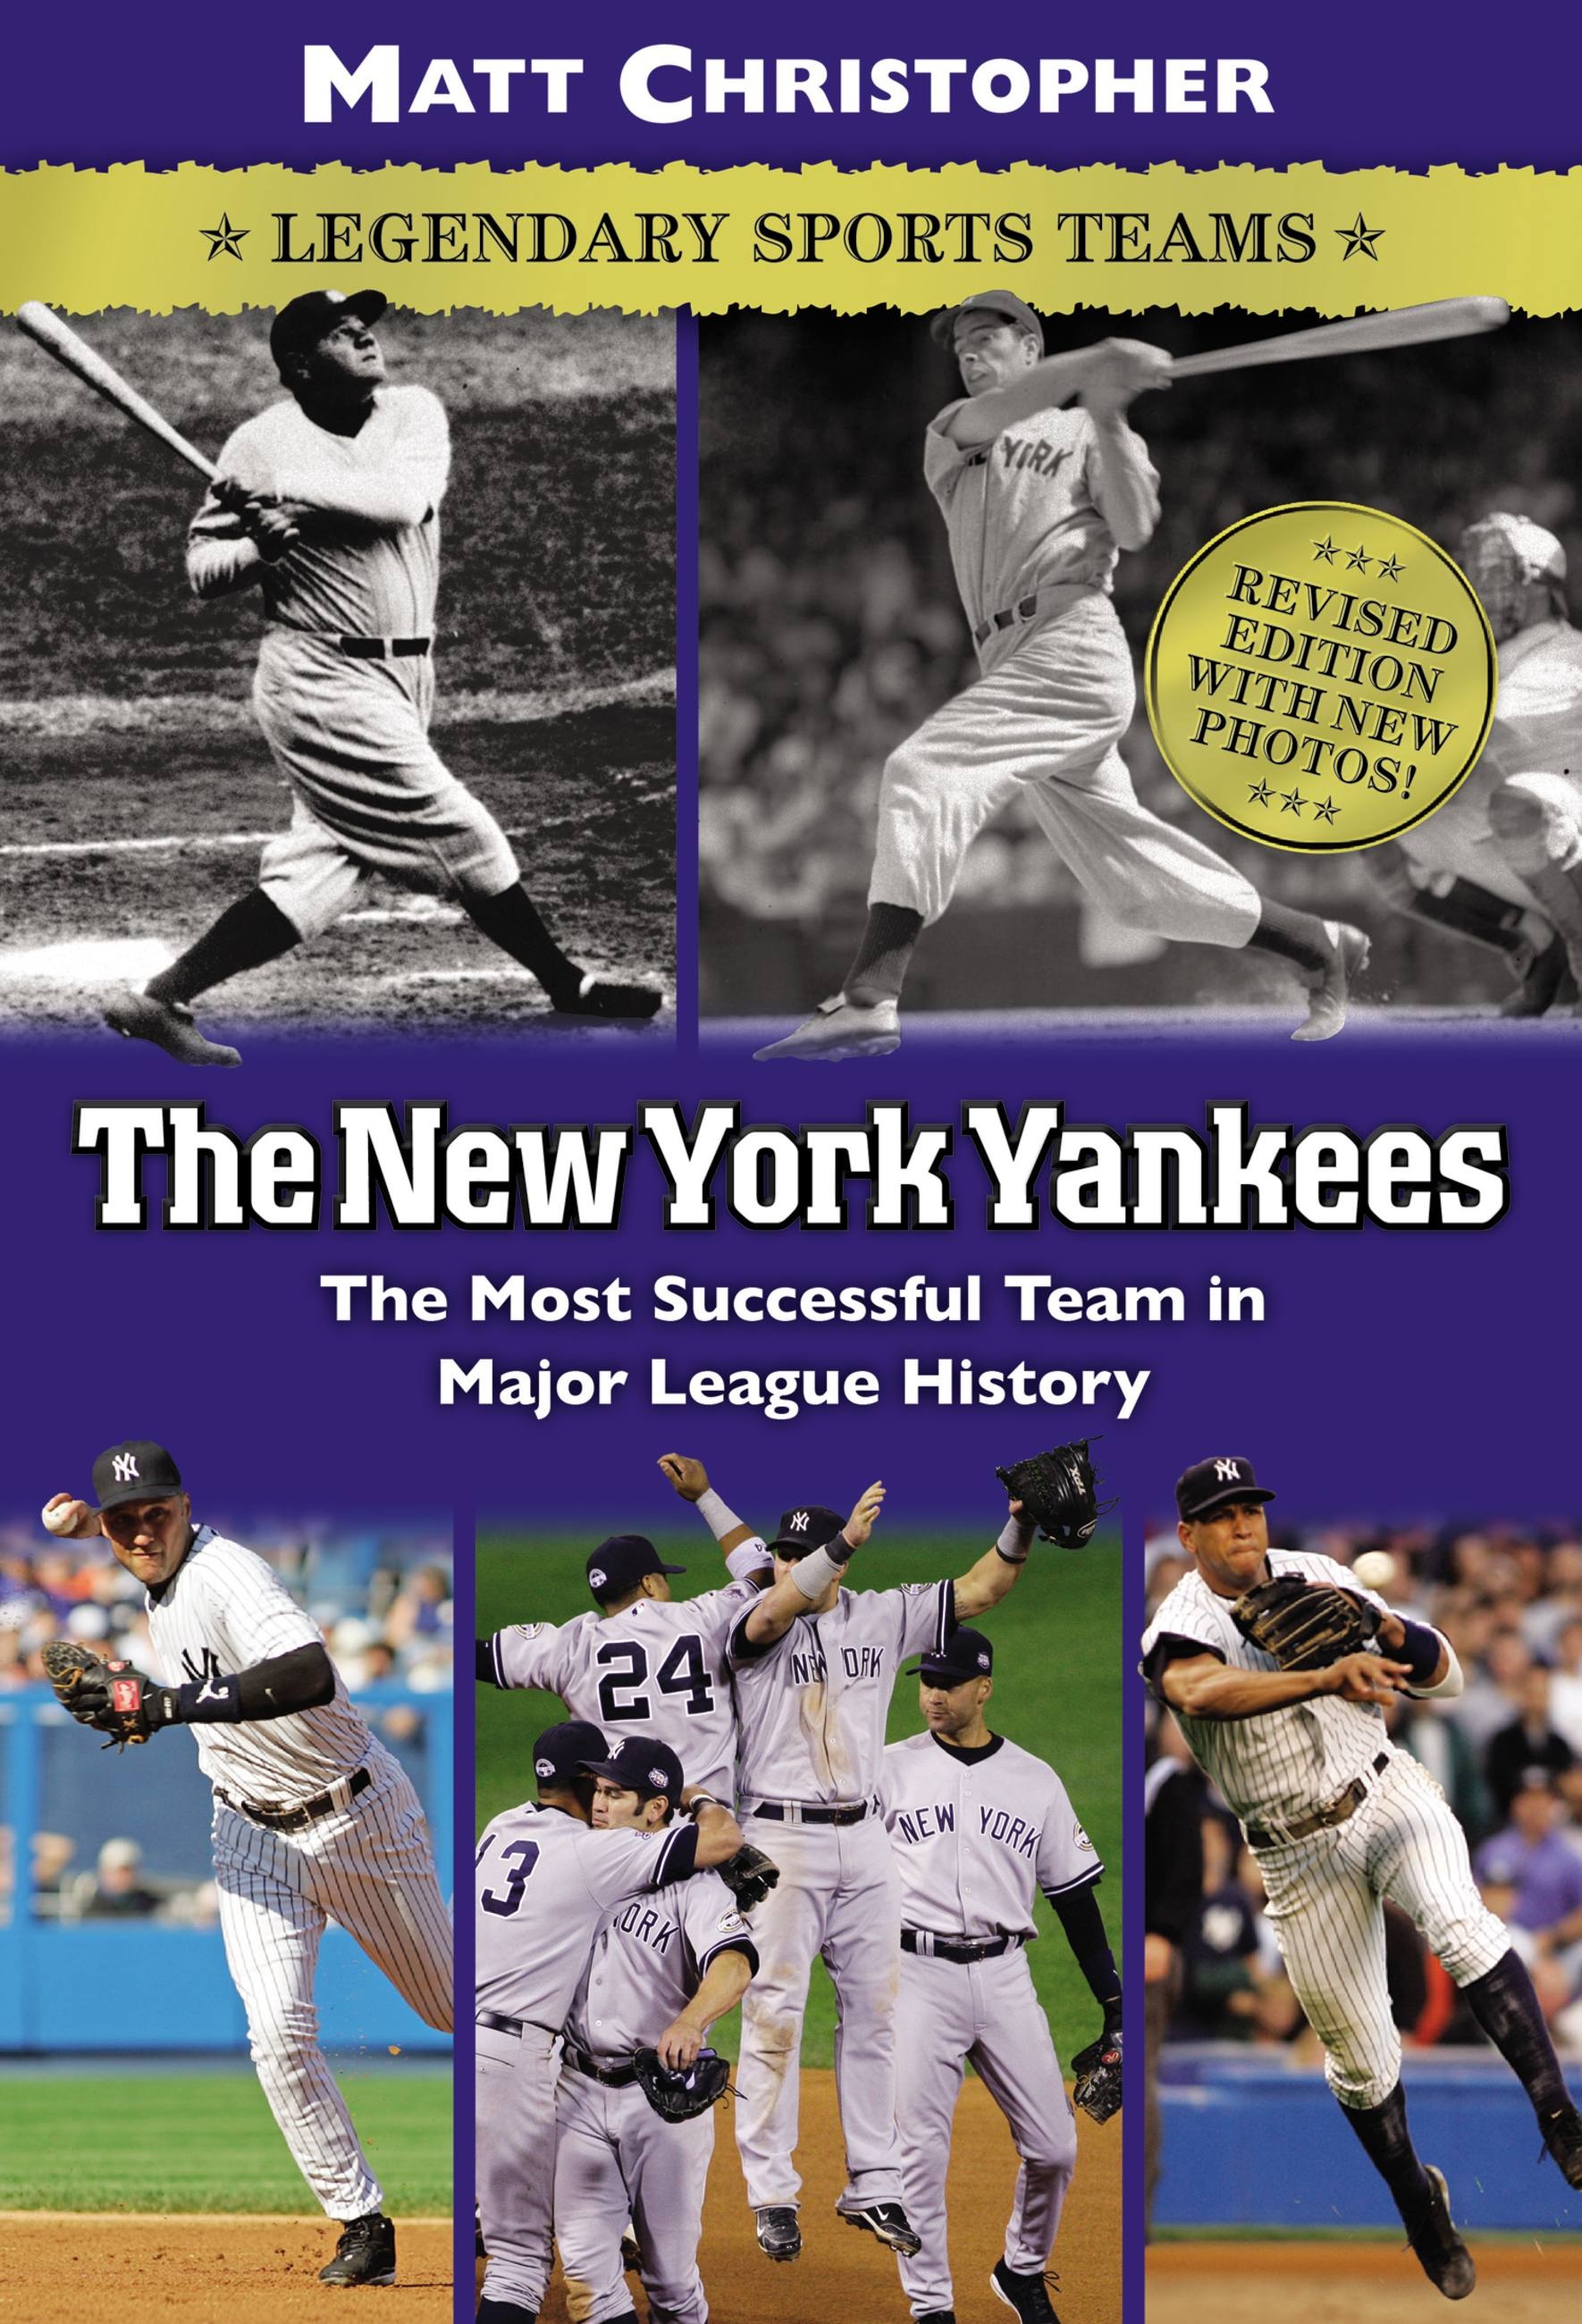 How Many World Series Have the Yankees Won? New York Yankees World Series  Record and History